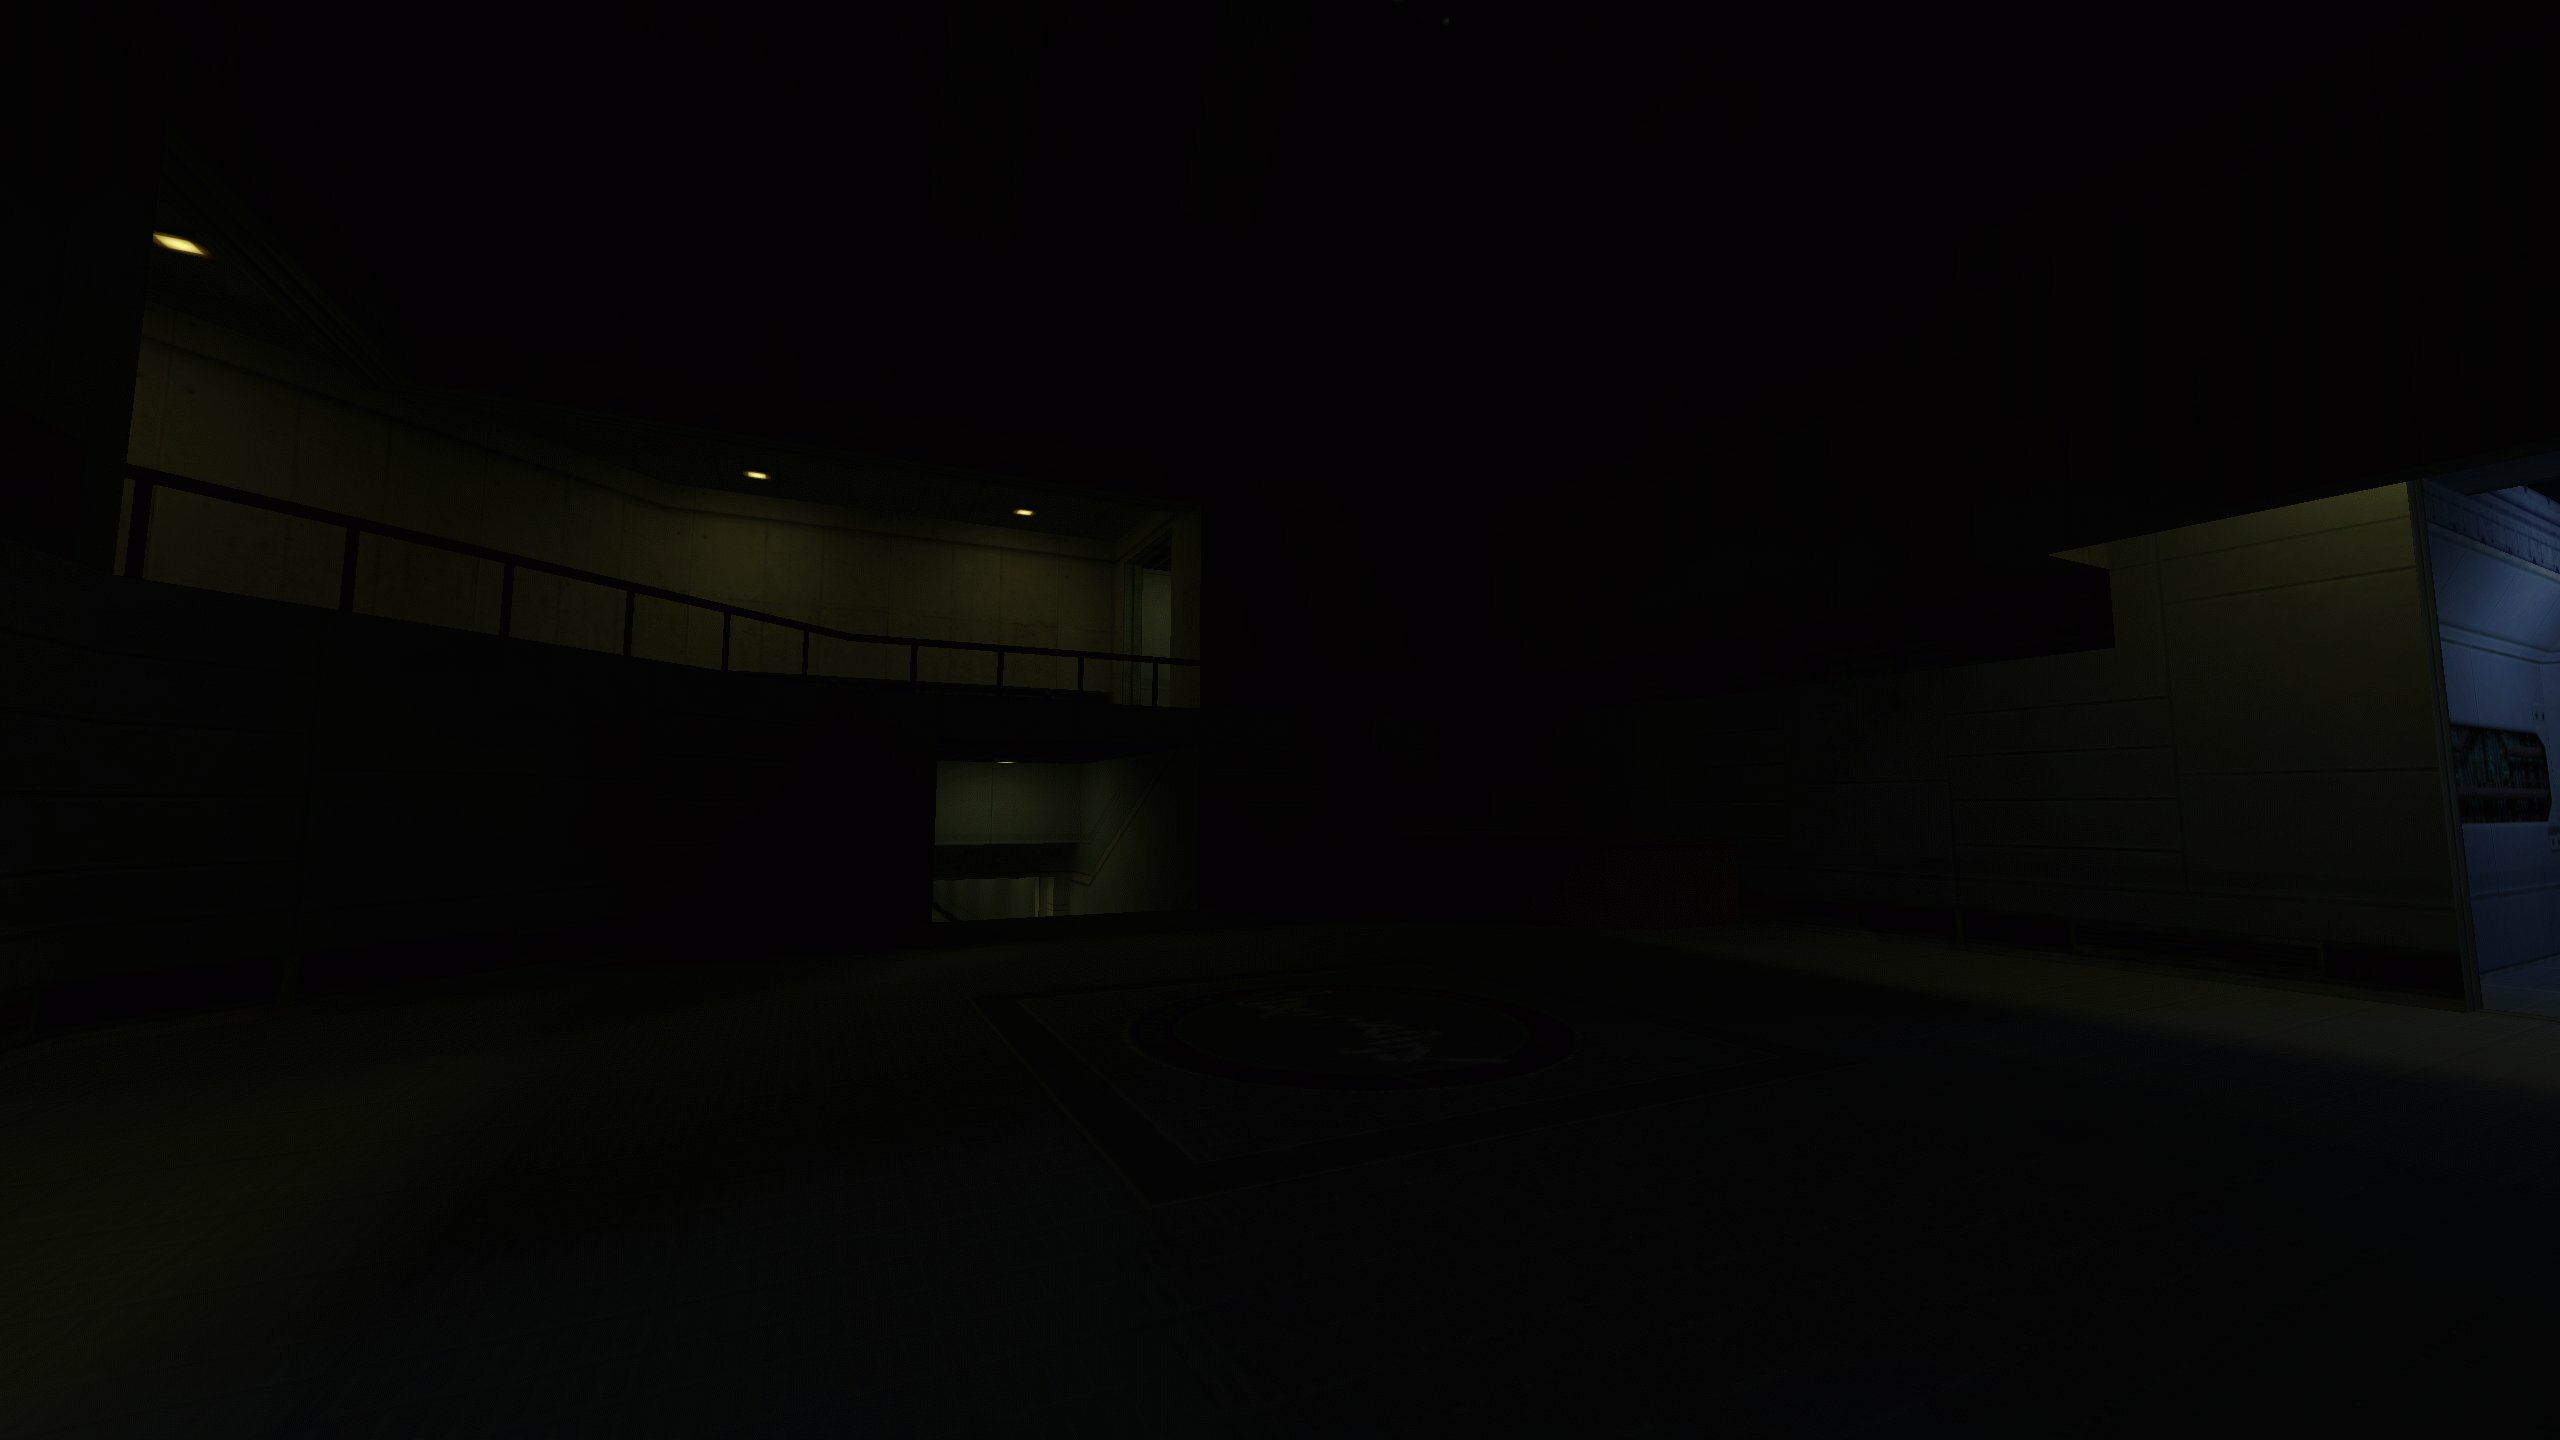 Skyroom, SCP: Containment Breach Unity Edition Wiki